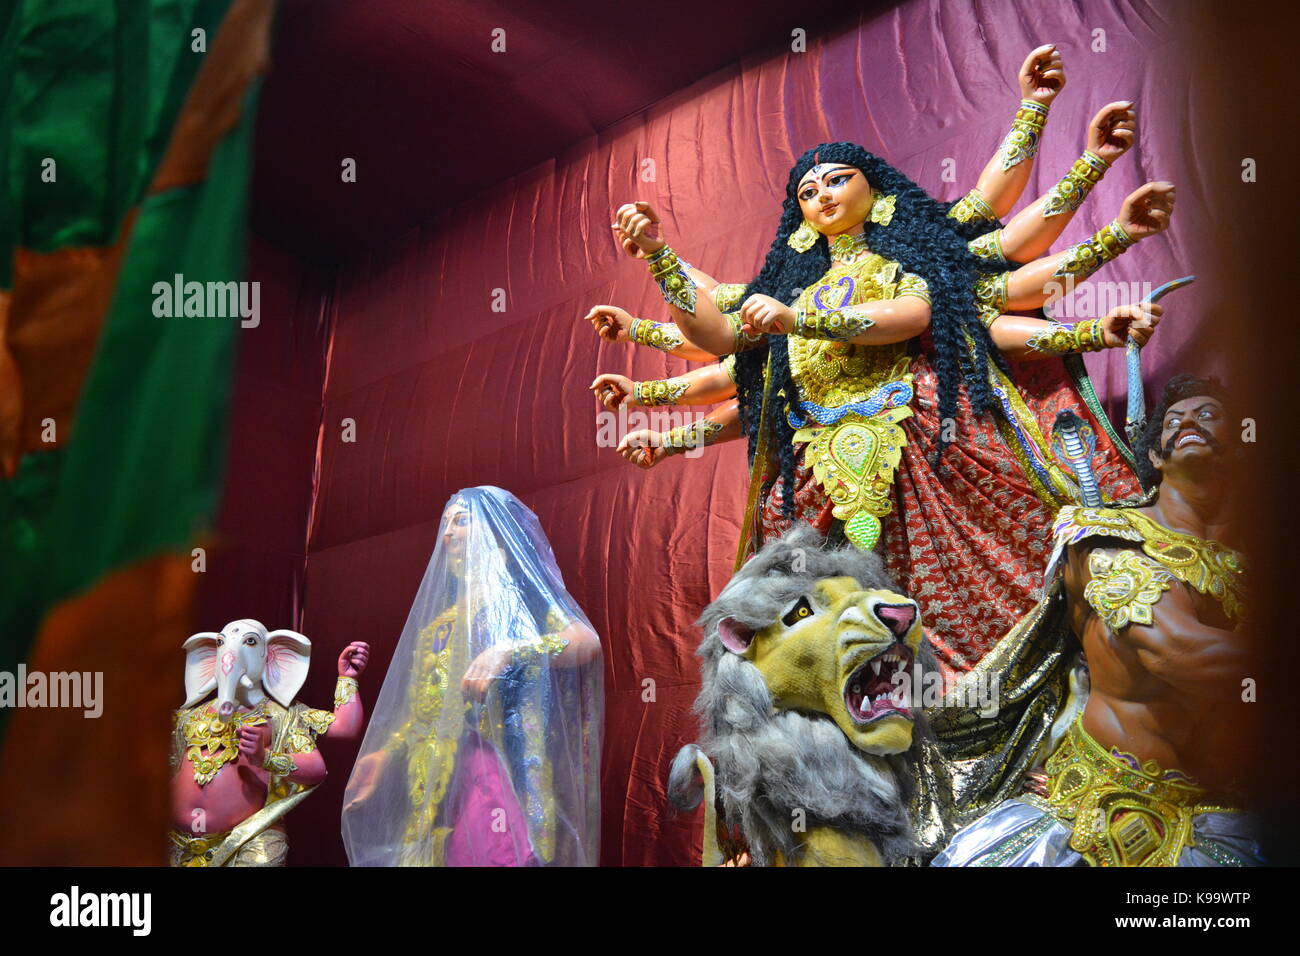 Calcutta, India. 22nd Sept, 2017. Incredible India. A puja pandal decked up with Goddesses Durga idol before Hindu festival Durgapuja. Durgapuja an International carnival and festivity will commence on September 26, 2017. Credit: Rupa Ghosh/Alamy Live News. Stock Photo